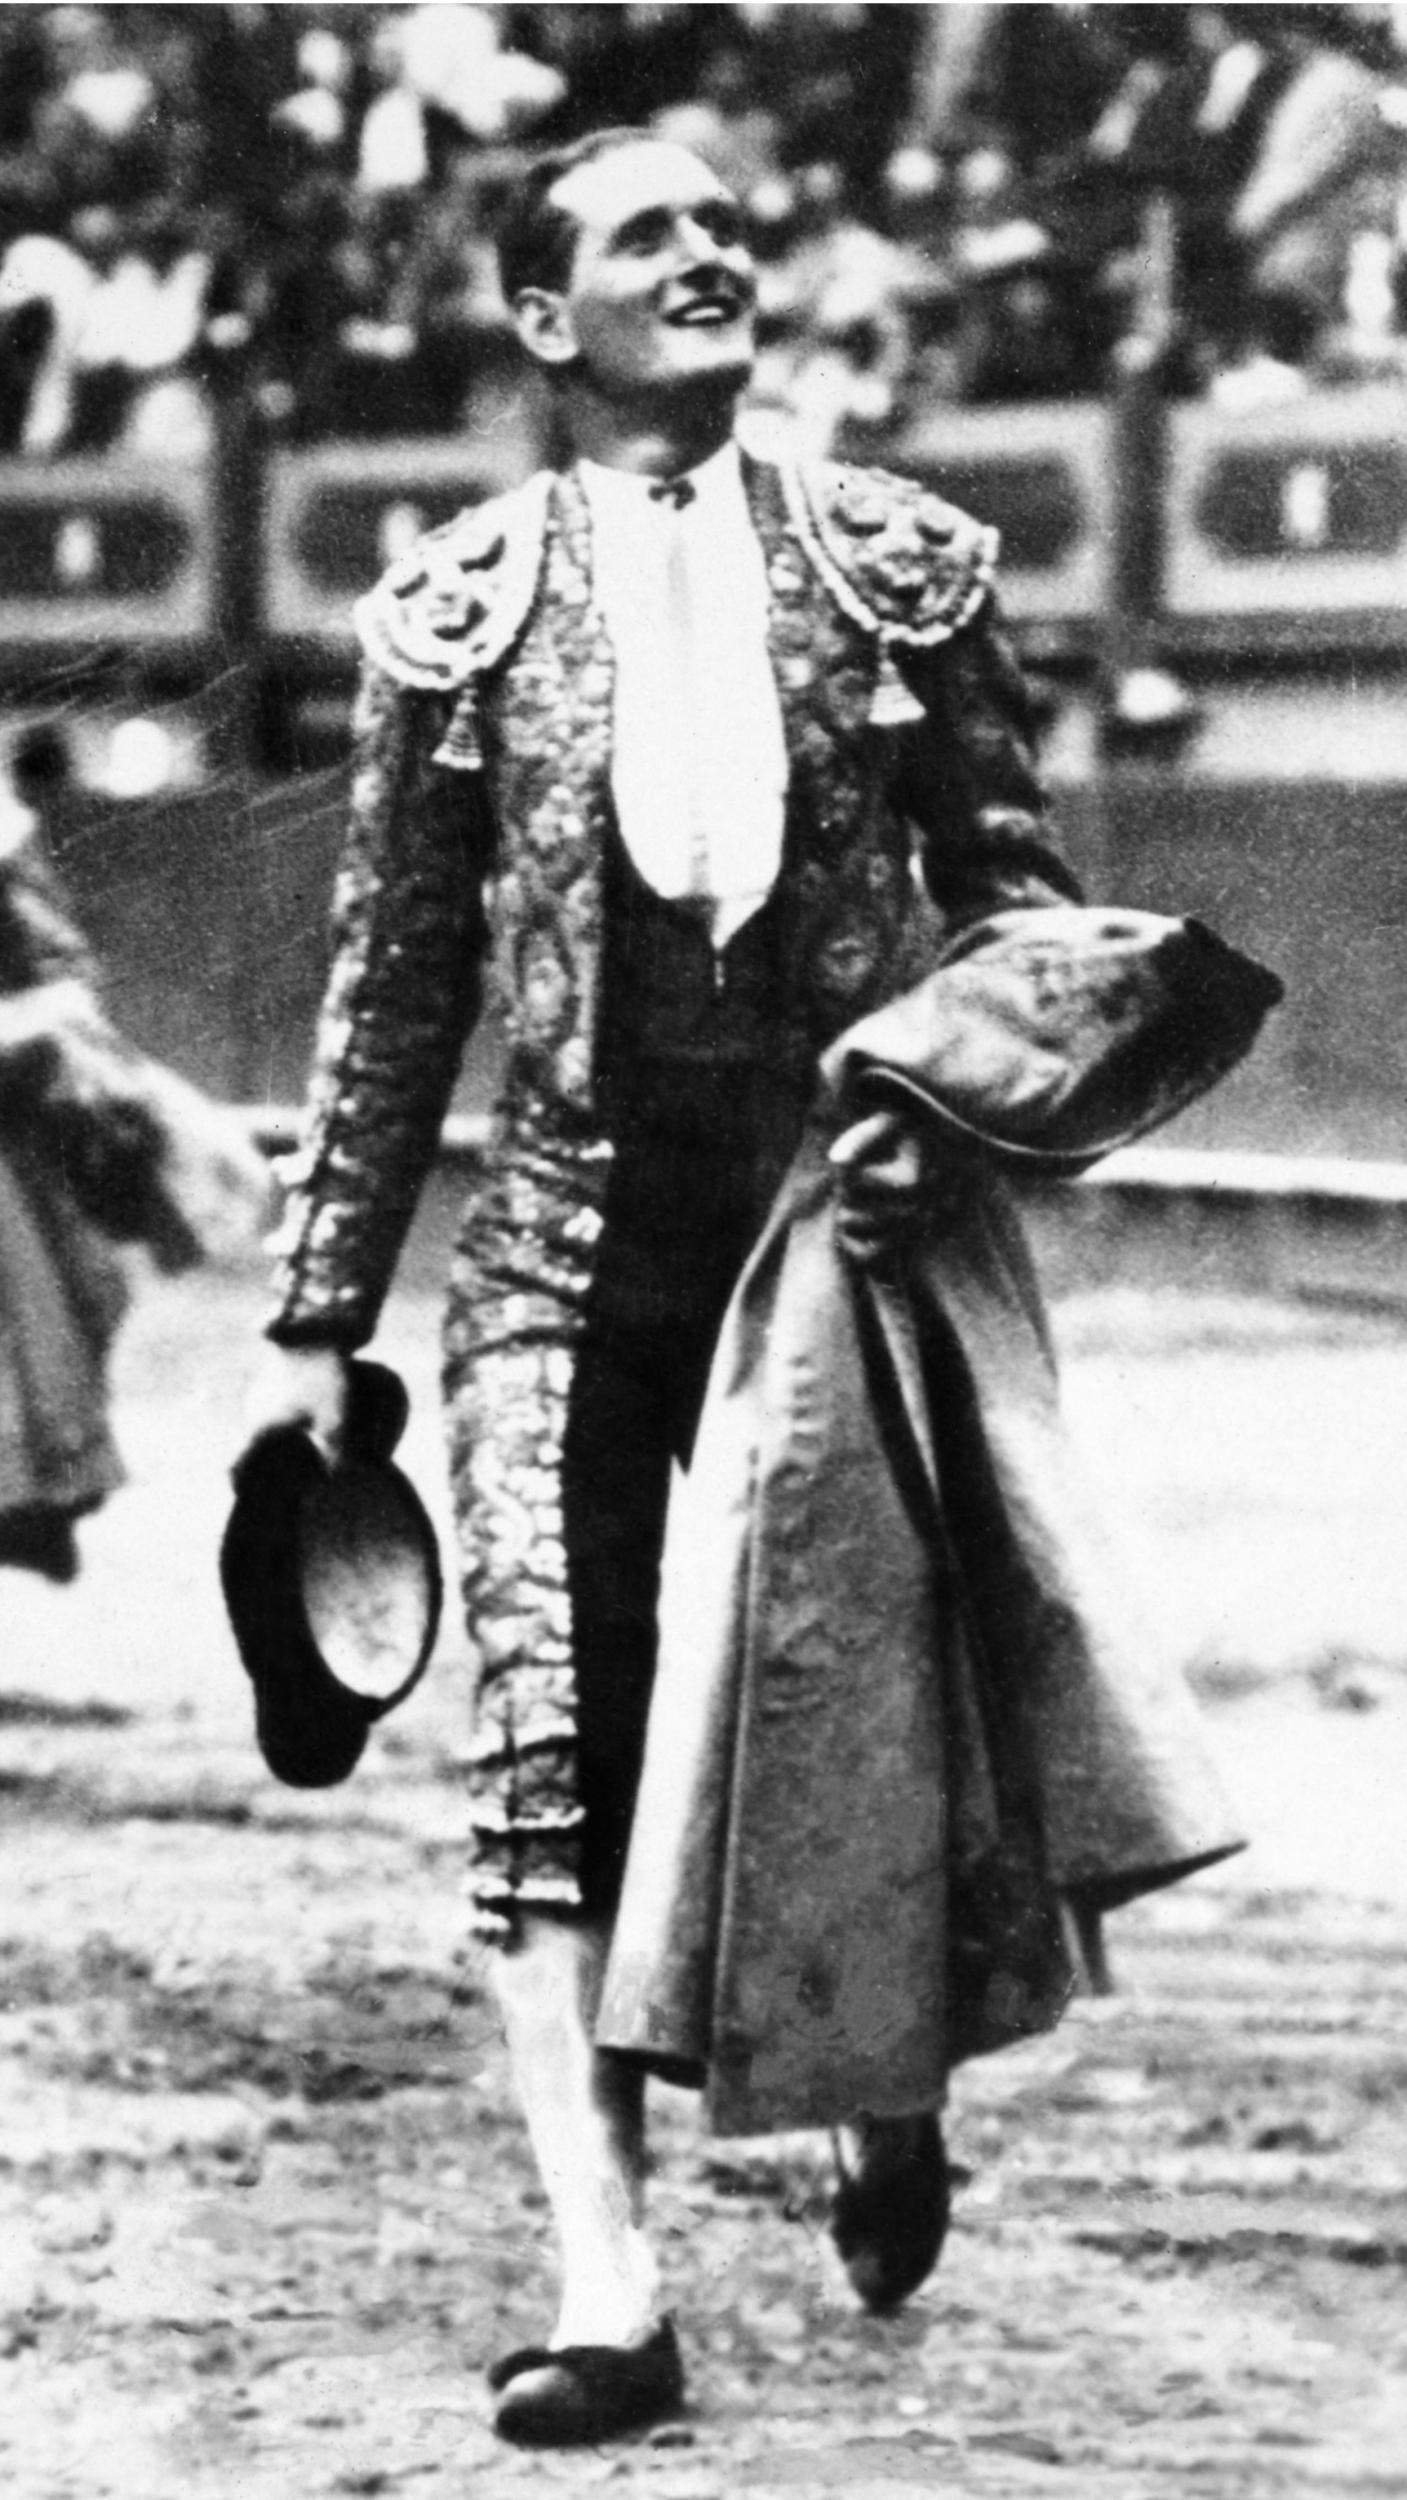 Franklin in the ring in his matador clothing (Rex)